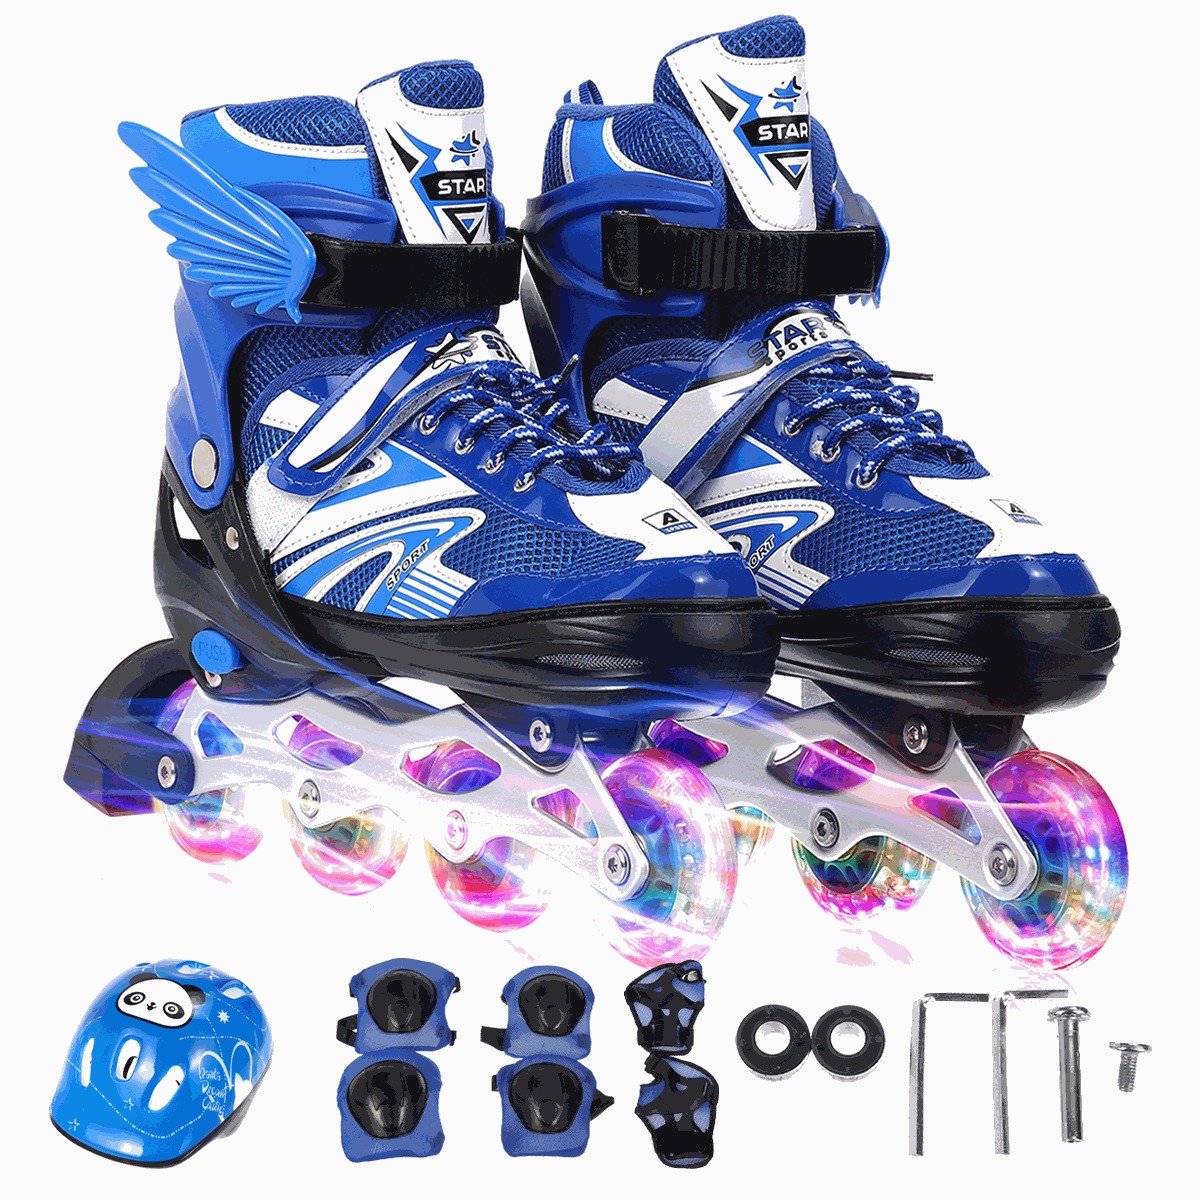 Flashing Inline Skates with Protective Gear Set Roller Blades for Men Women Kids 